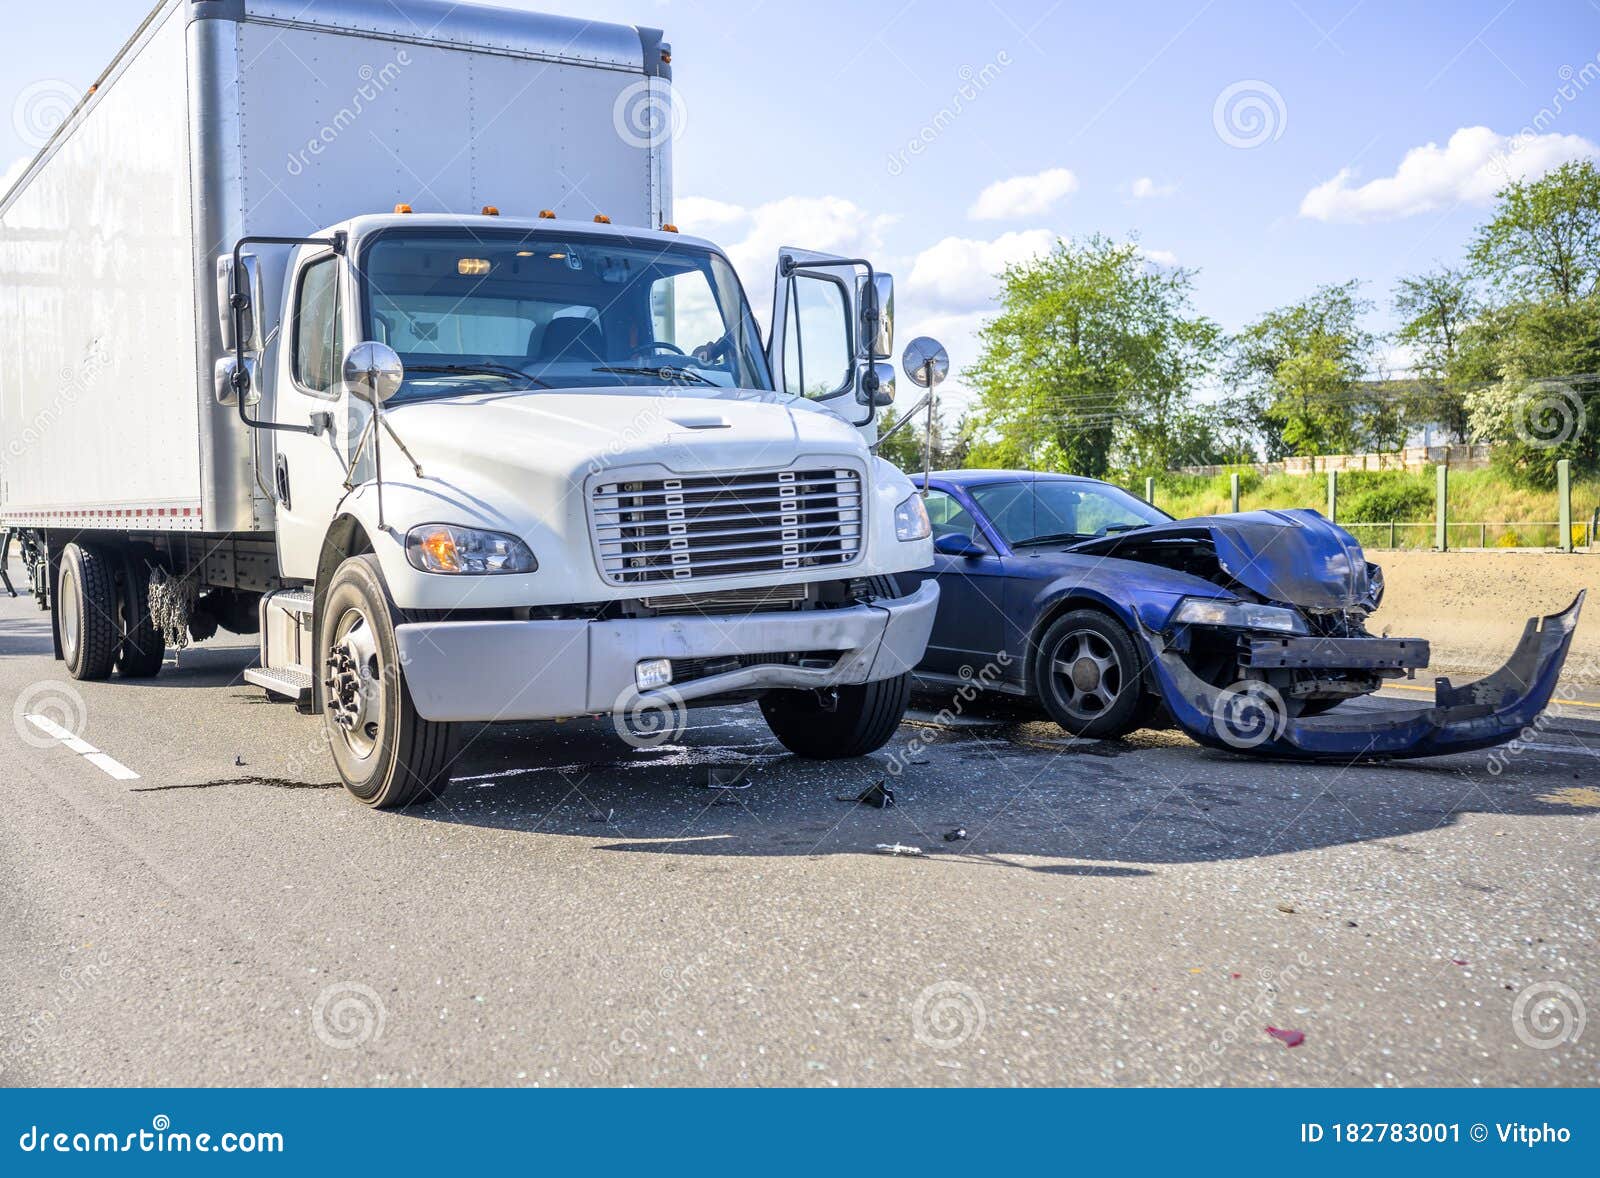 road accident with damage to vehicles as a result of a collision between a semi truck with box trailer and a car